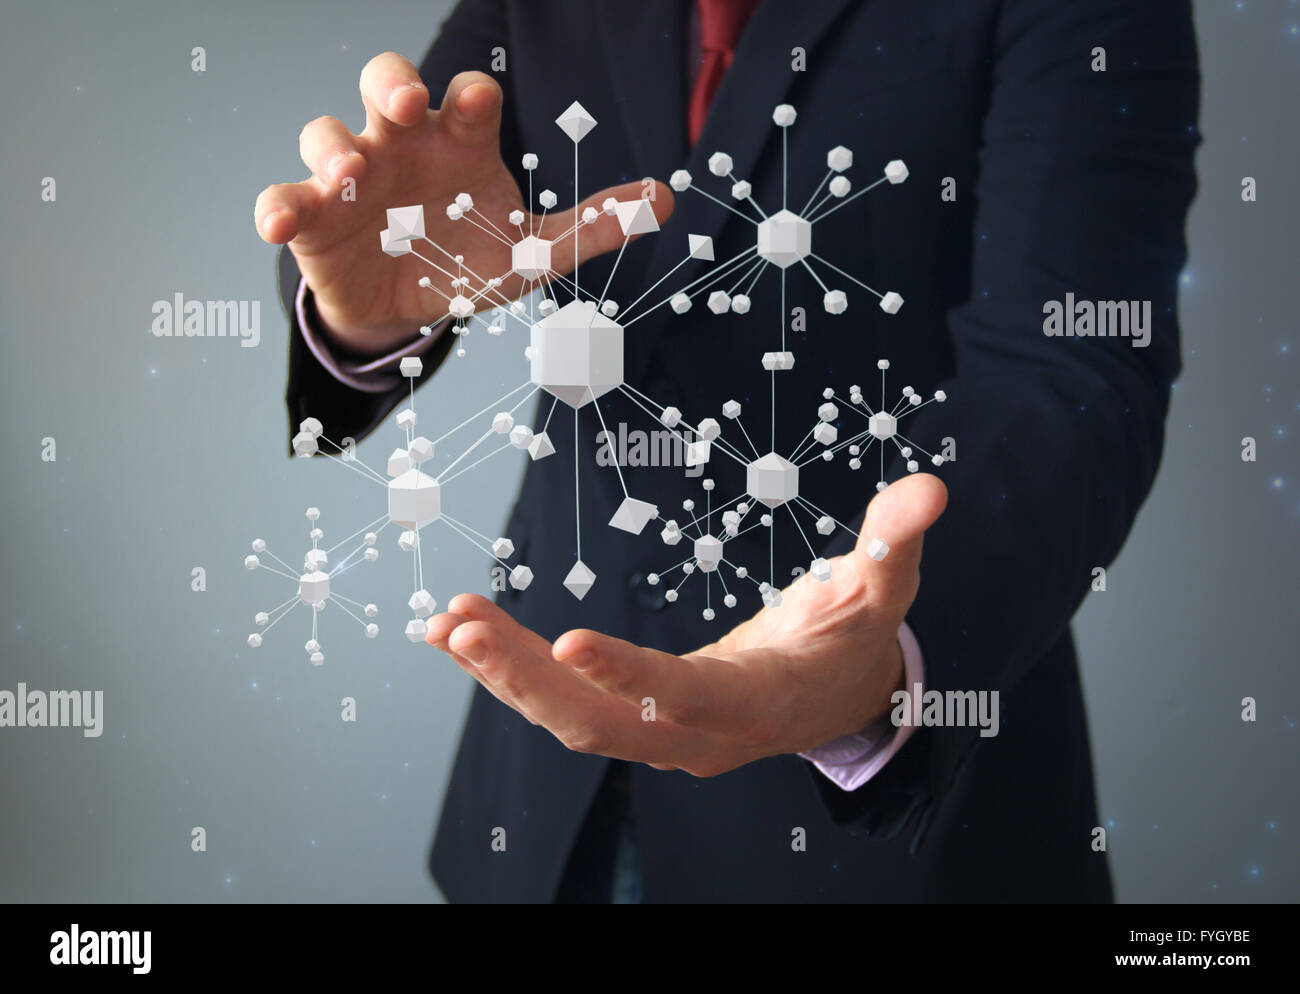 physics or connection concept: businessman with molecular structure on hands Stock Photo